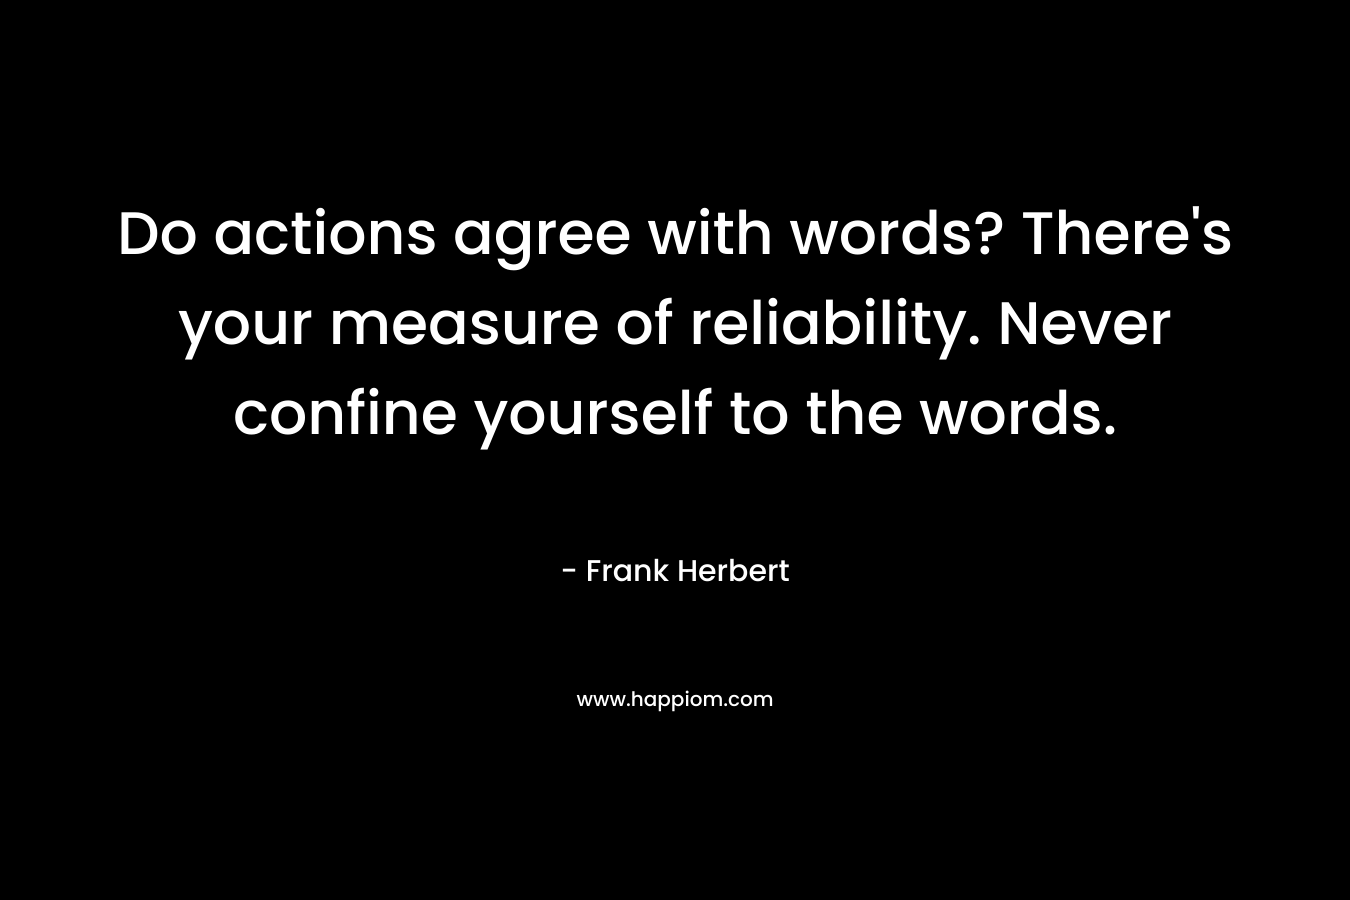 Do actions agree with words? There’s your measure of reliability. Never confine yourself to the words. – Frank Herbert